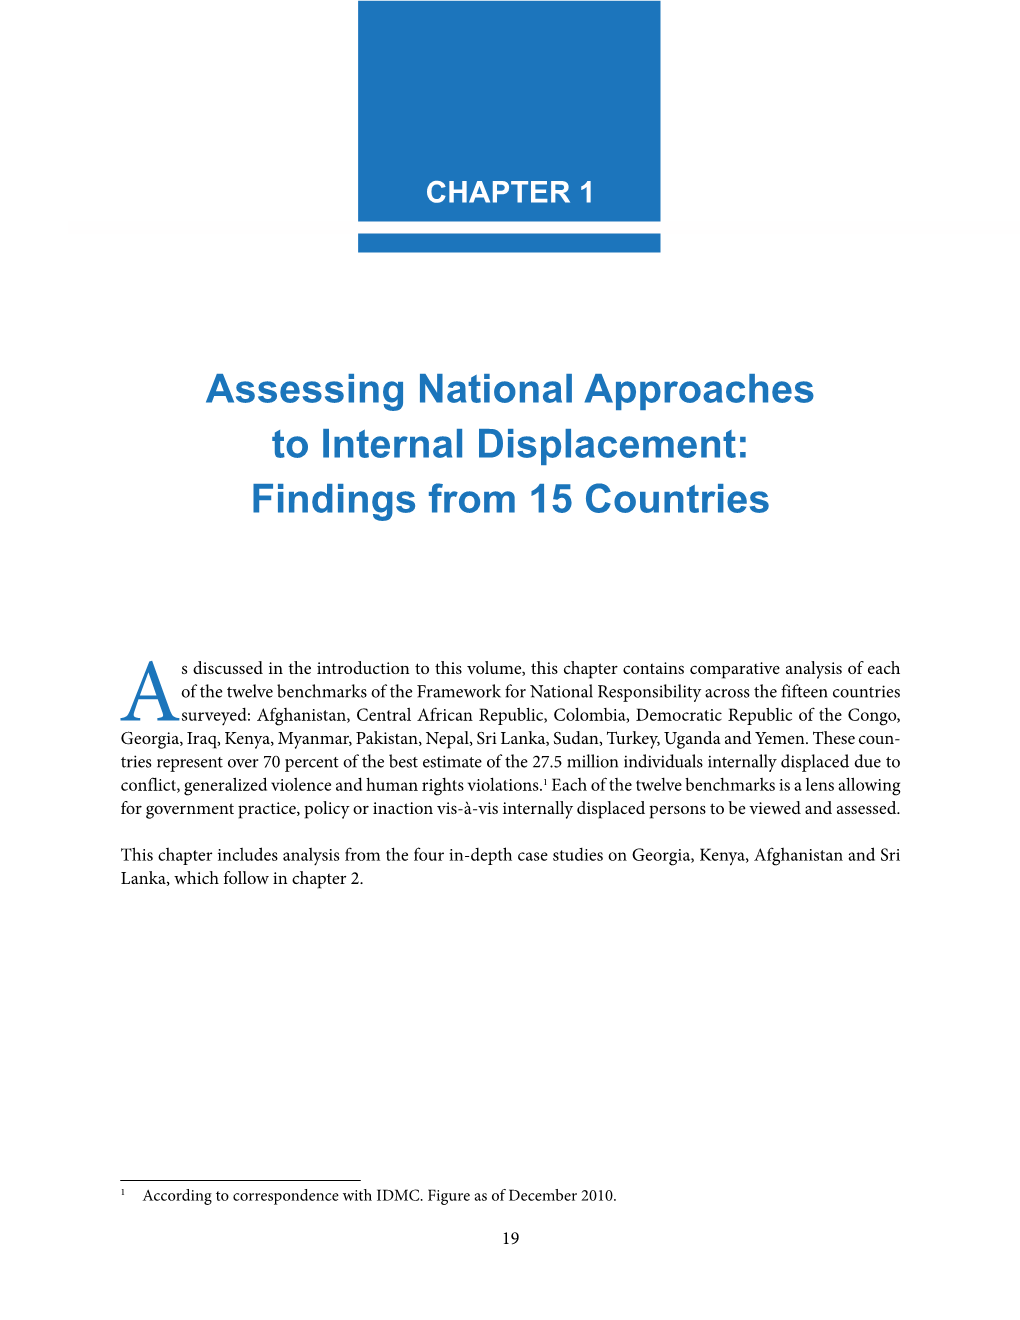 Chapter 1: Assessing National Approaches to Internal Displacement